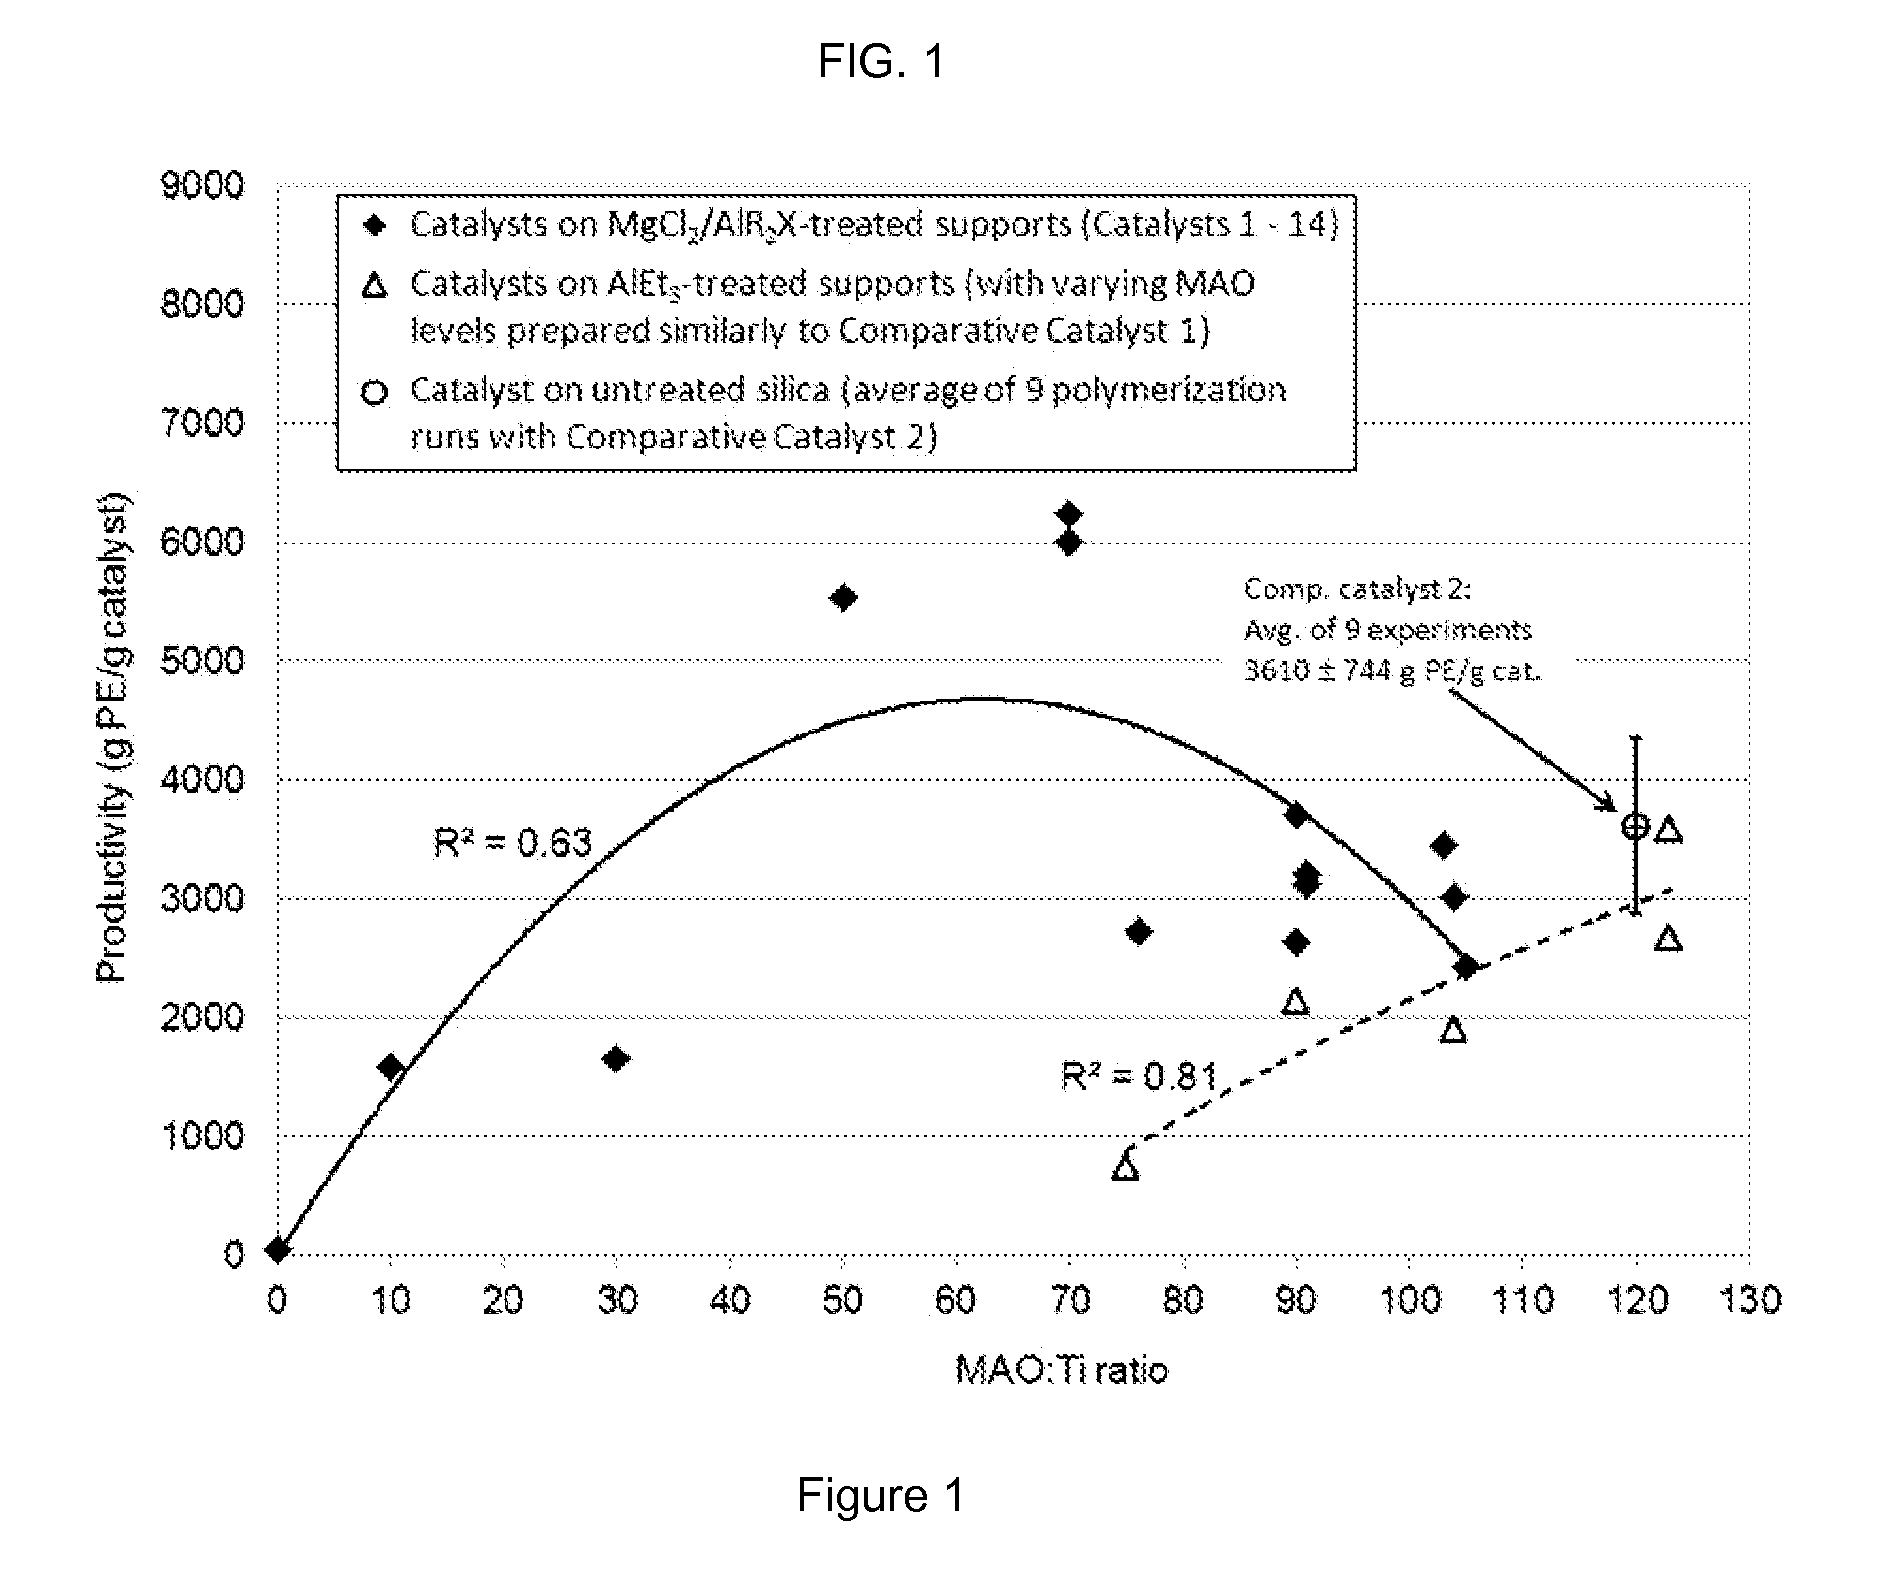 Passivated supports for use with olefin polymerization catalysts